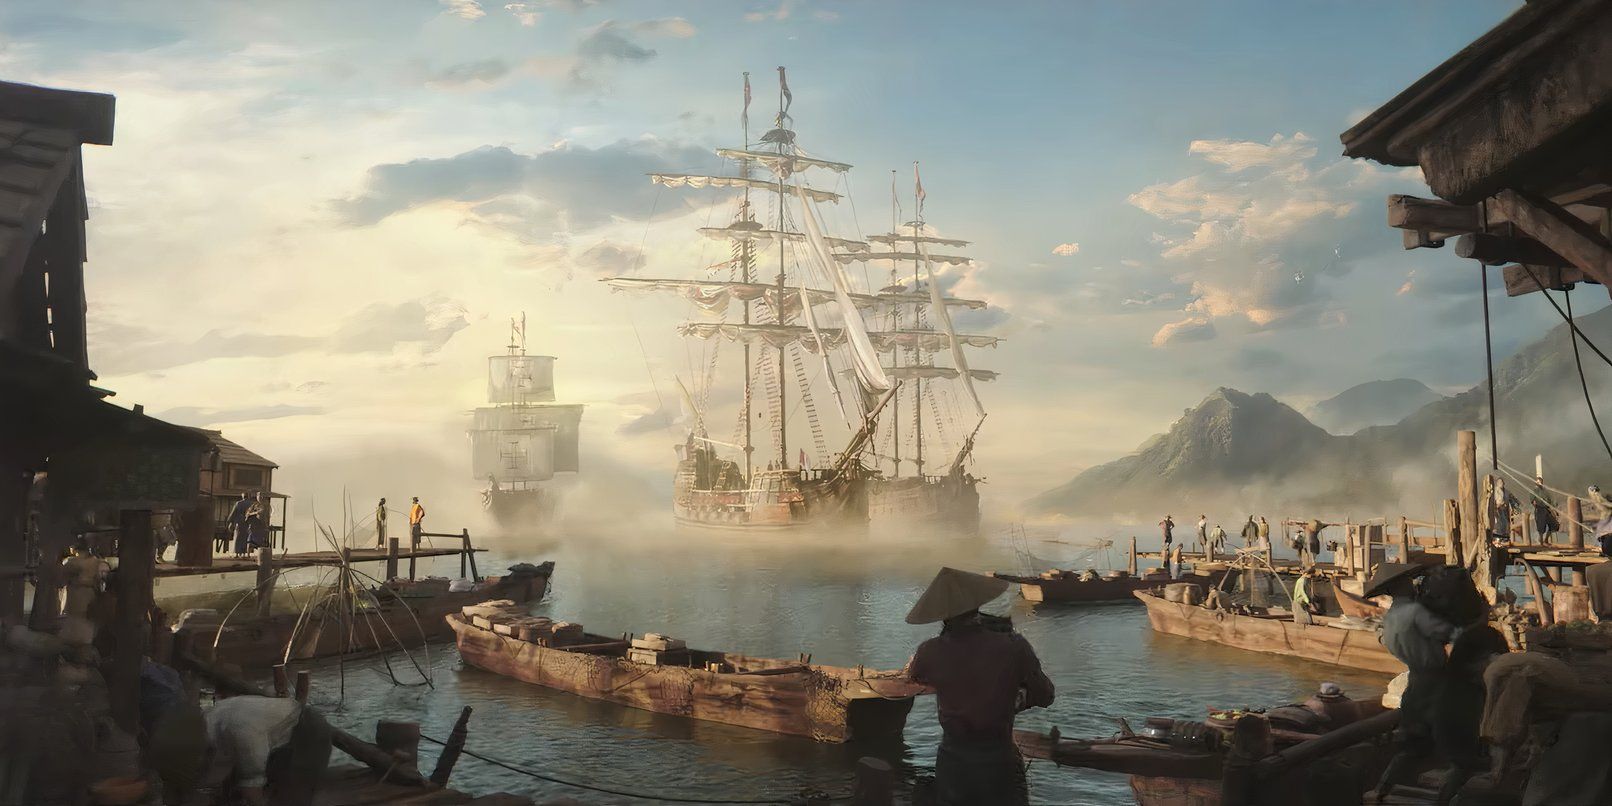 A screenshot of a busy harbor in the Assassin's Creed Shadows trailer. Three large ships pull into the docks as dockhands in straw hats unload cargo from smaller rowboats.